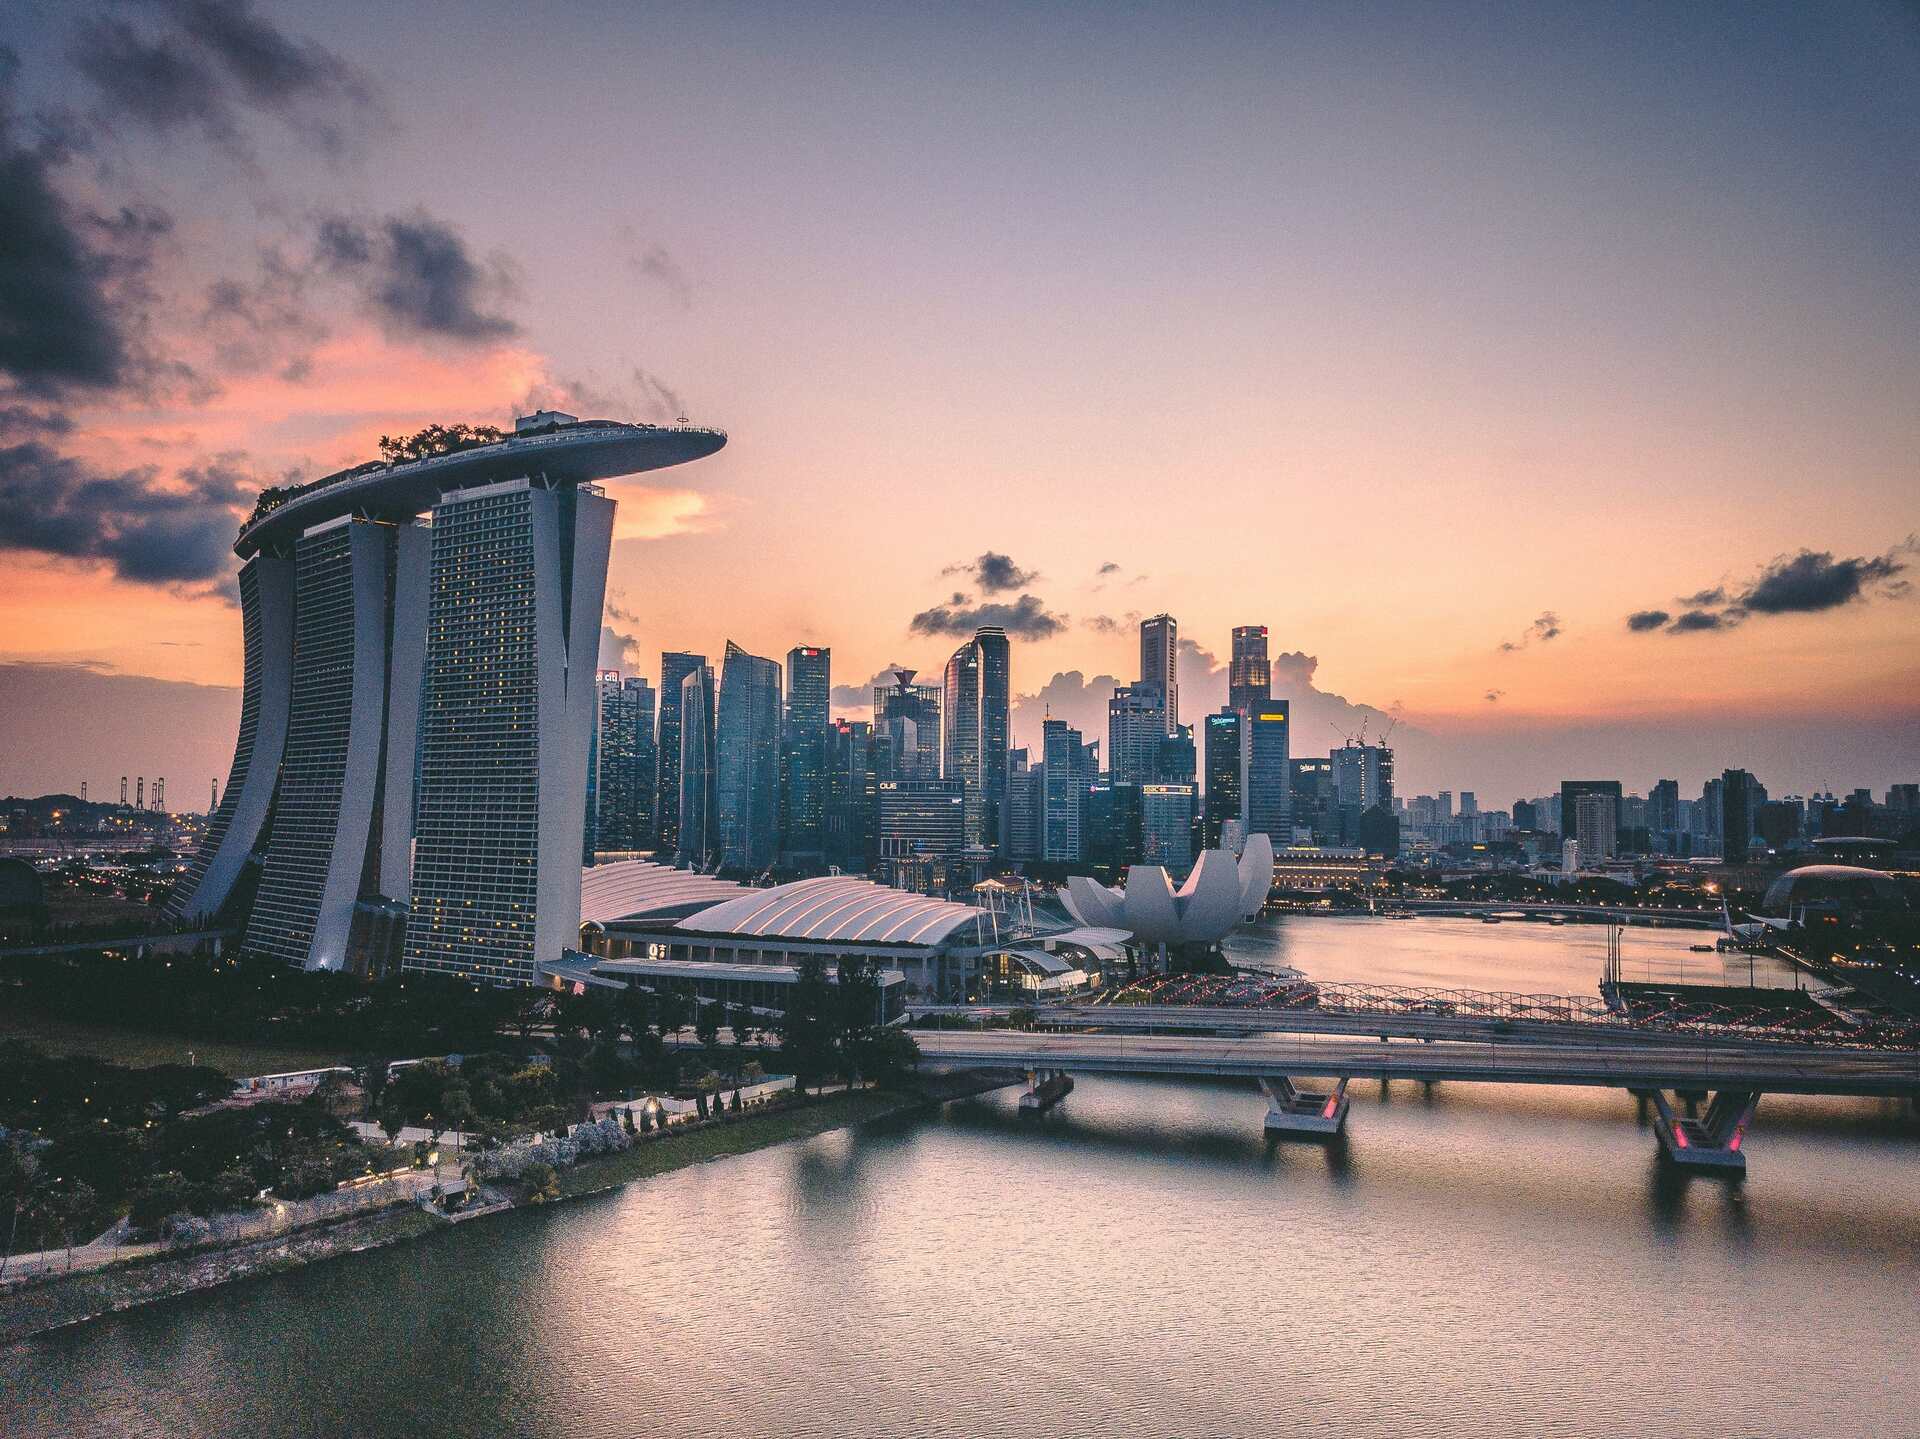 View of Singapore